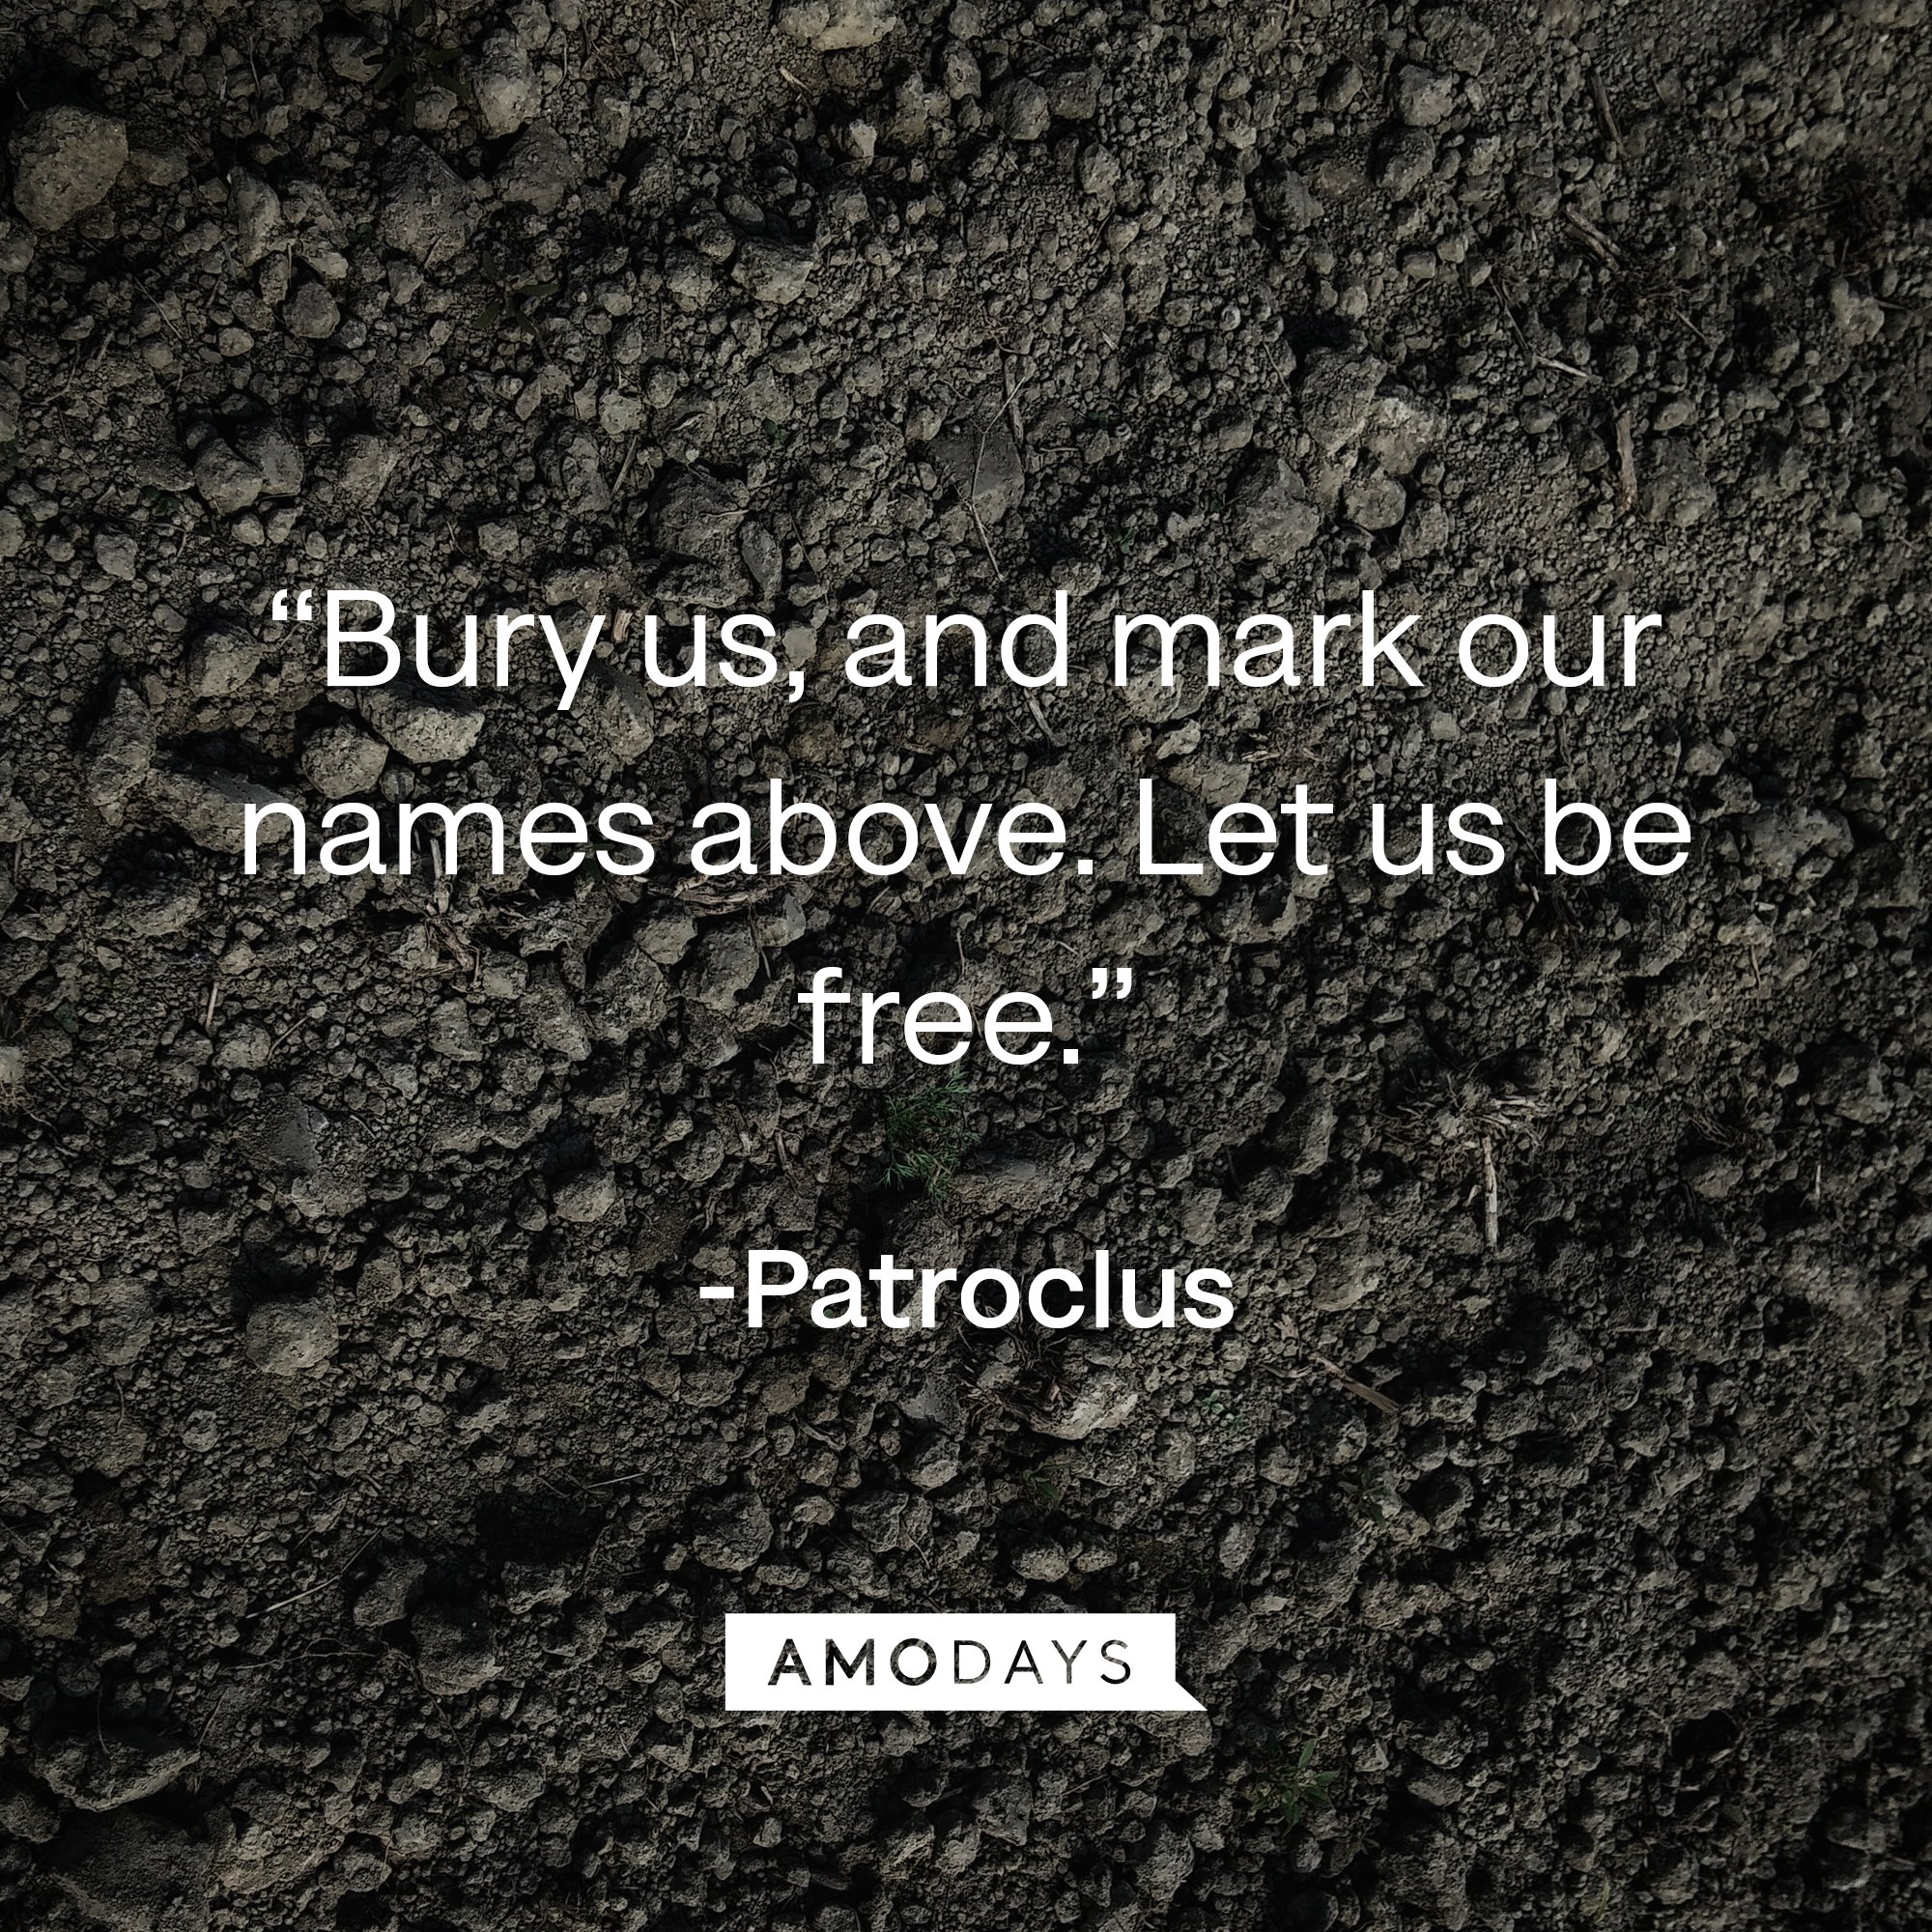 Patroclus's quote: “Bury us, and mark our names above. Let us be free.” | Image: AmoDays